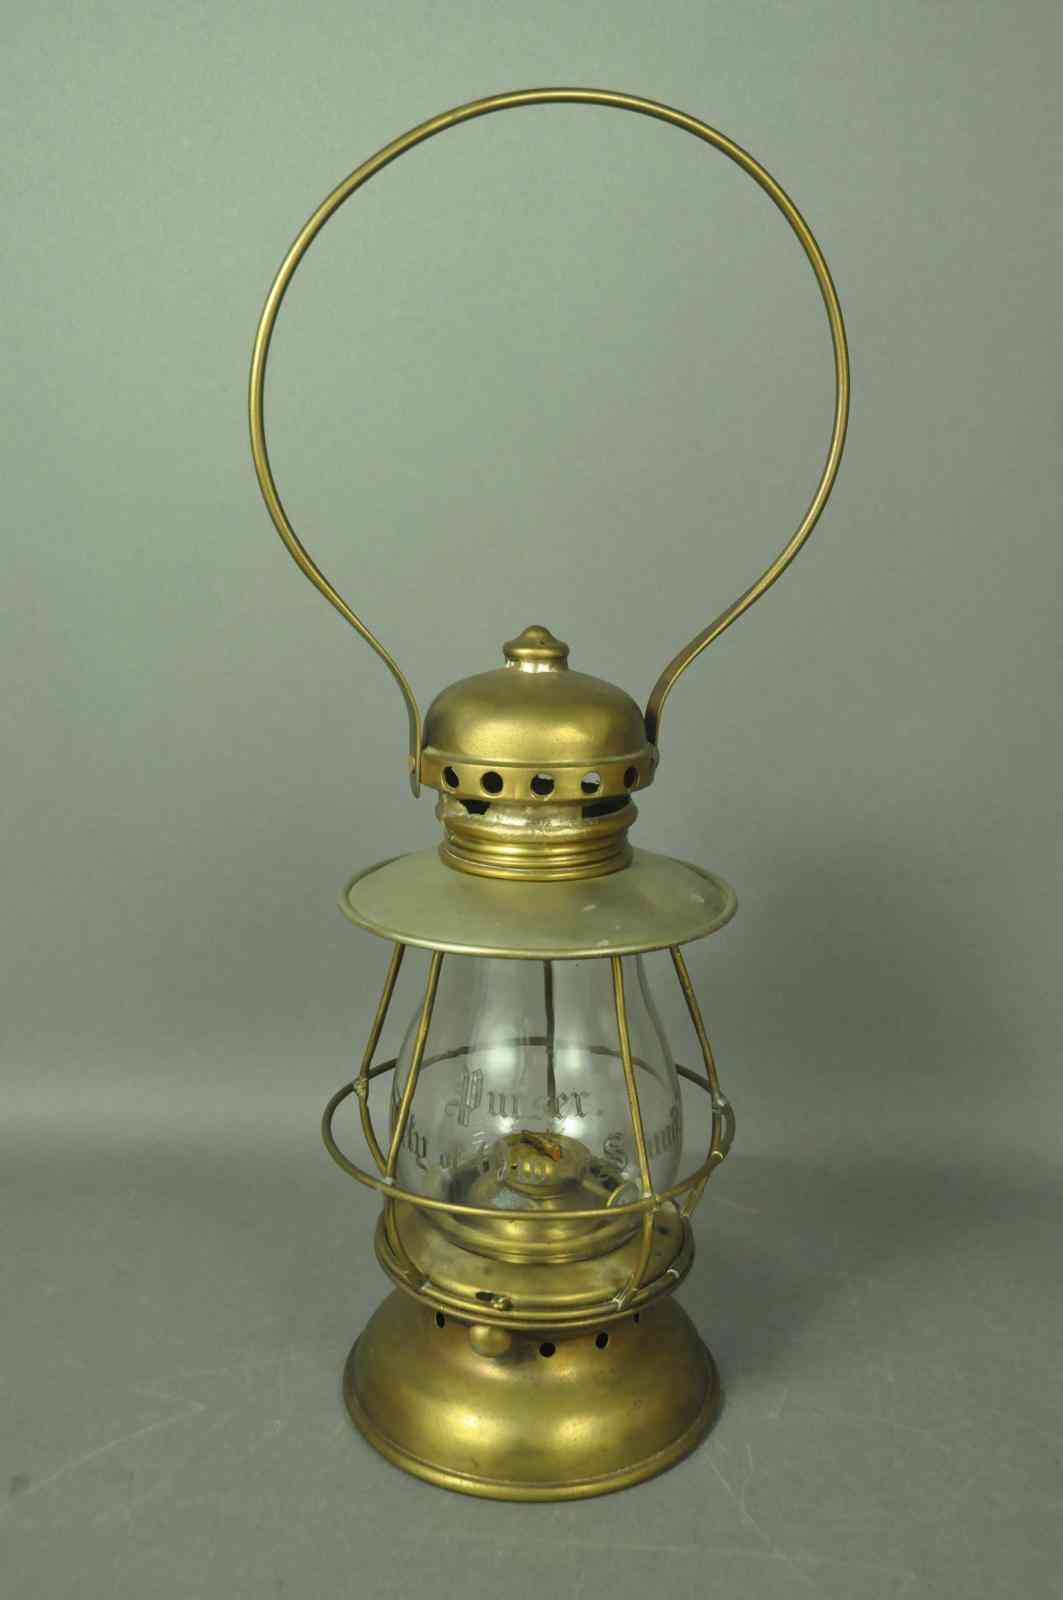 Lantern from City of Owen Sound Ship that shipwrecked in 1901